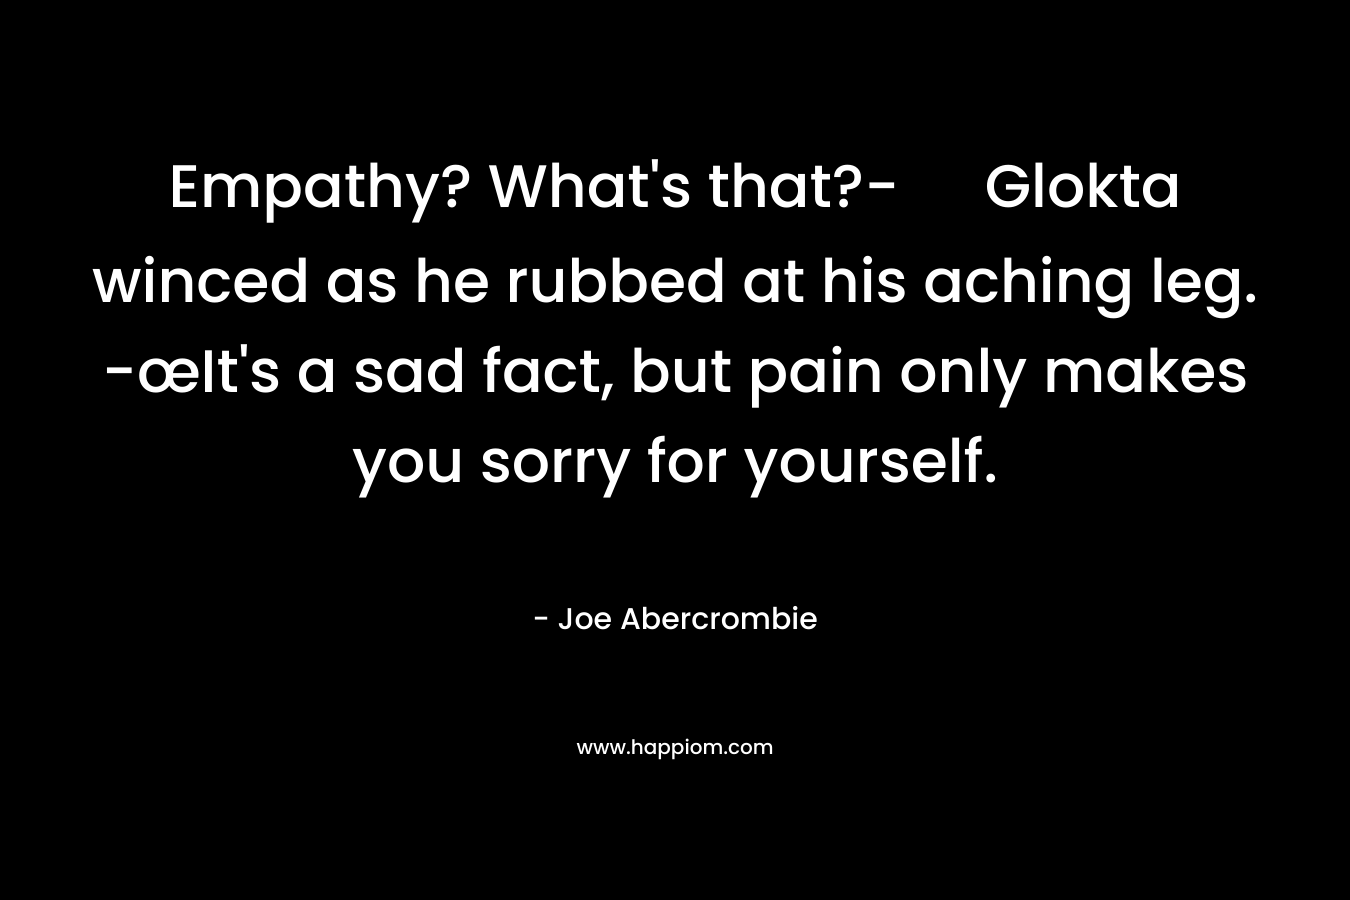 Empathy? What’s that?- Glokta winced as he rubbed at his aching leg. -œIt’s a sad fact, but pain only makes you sorry for yourself. – Joe Abercrombie